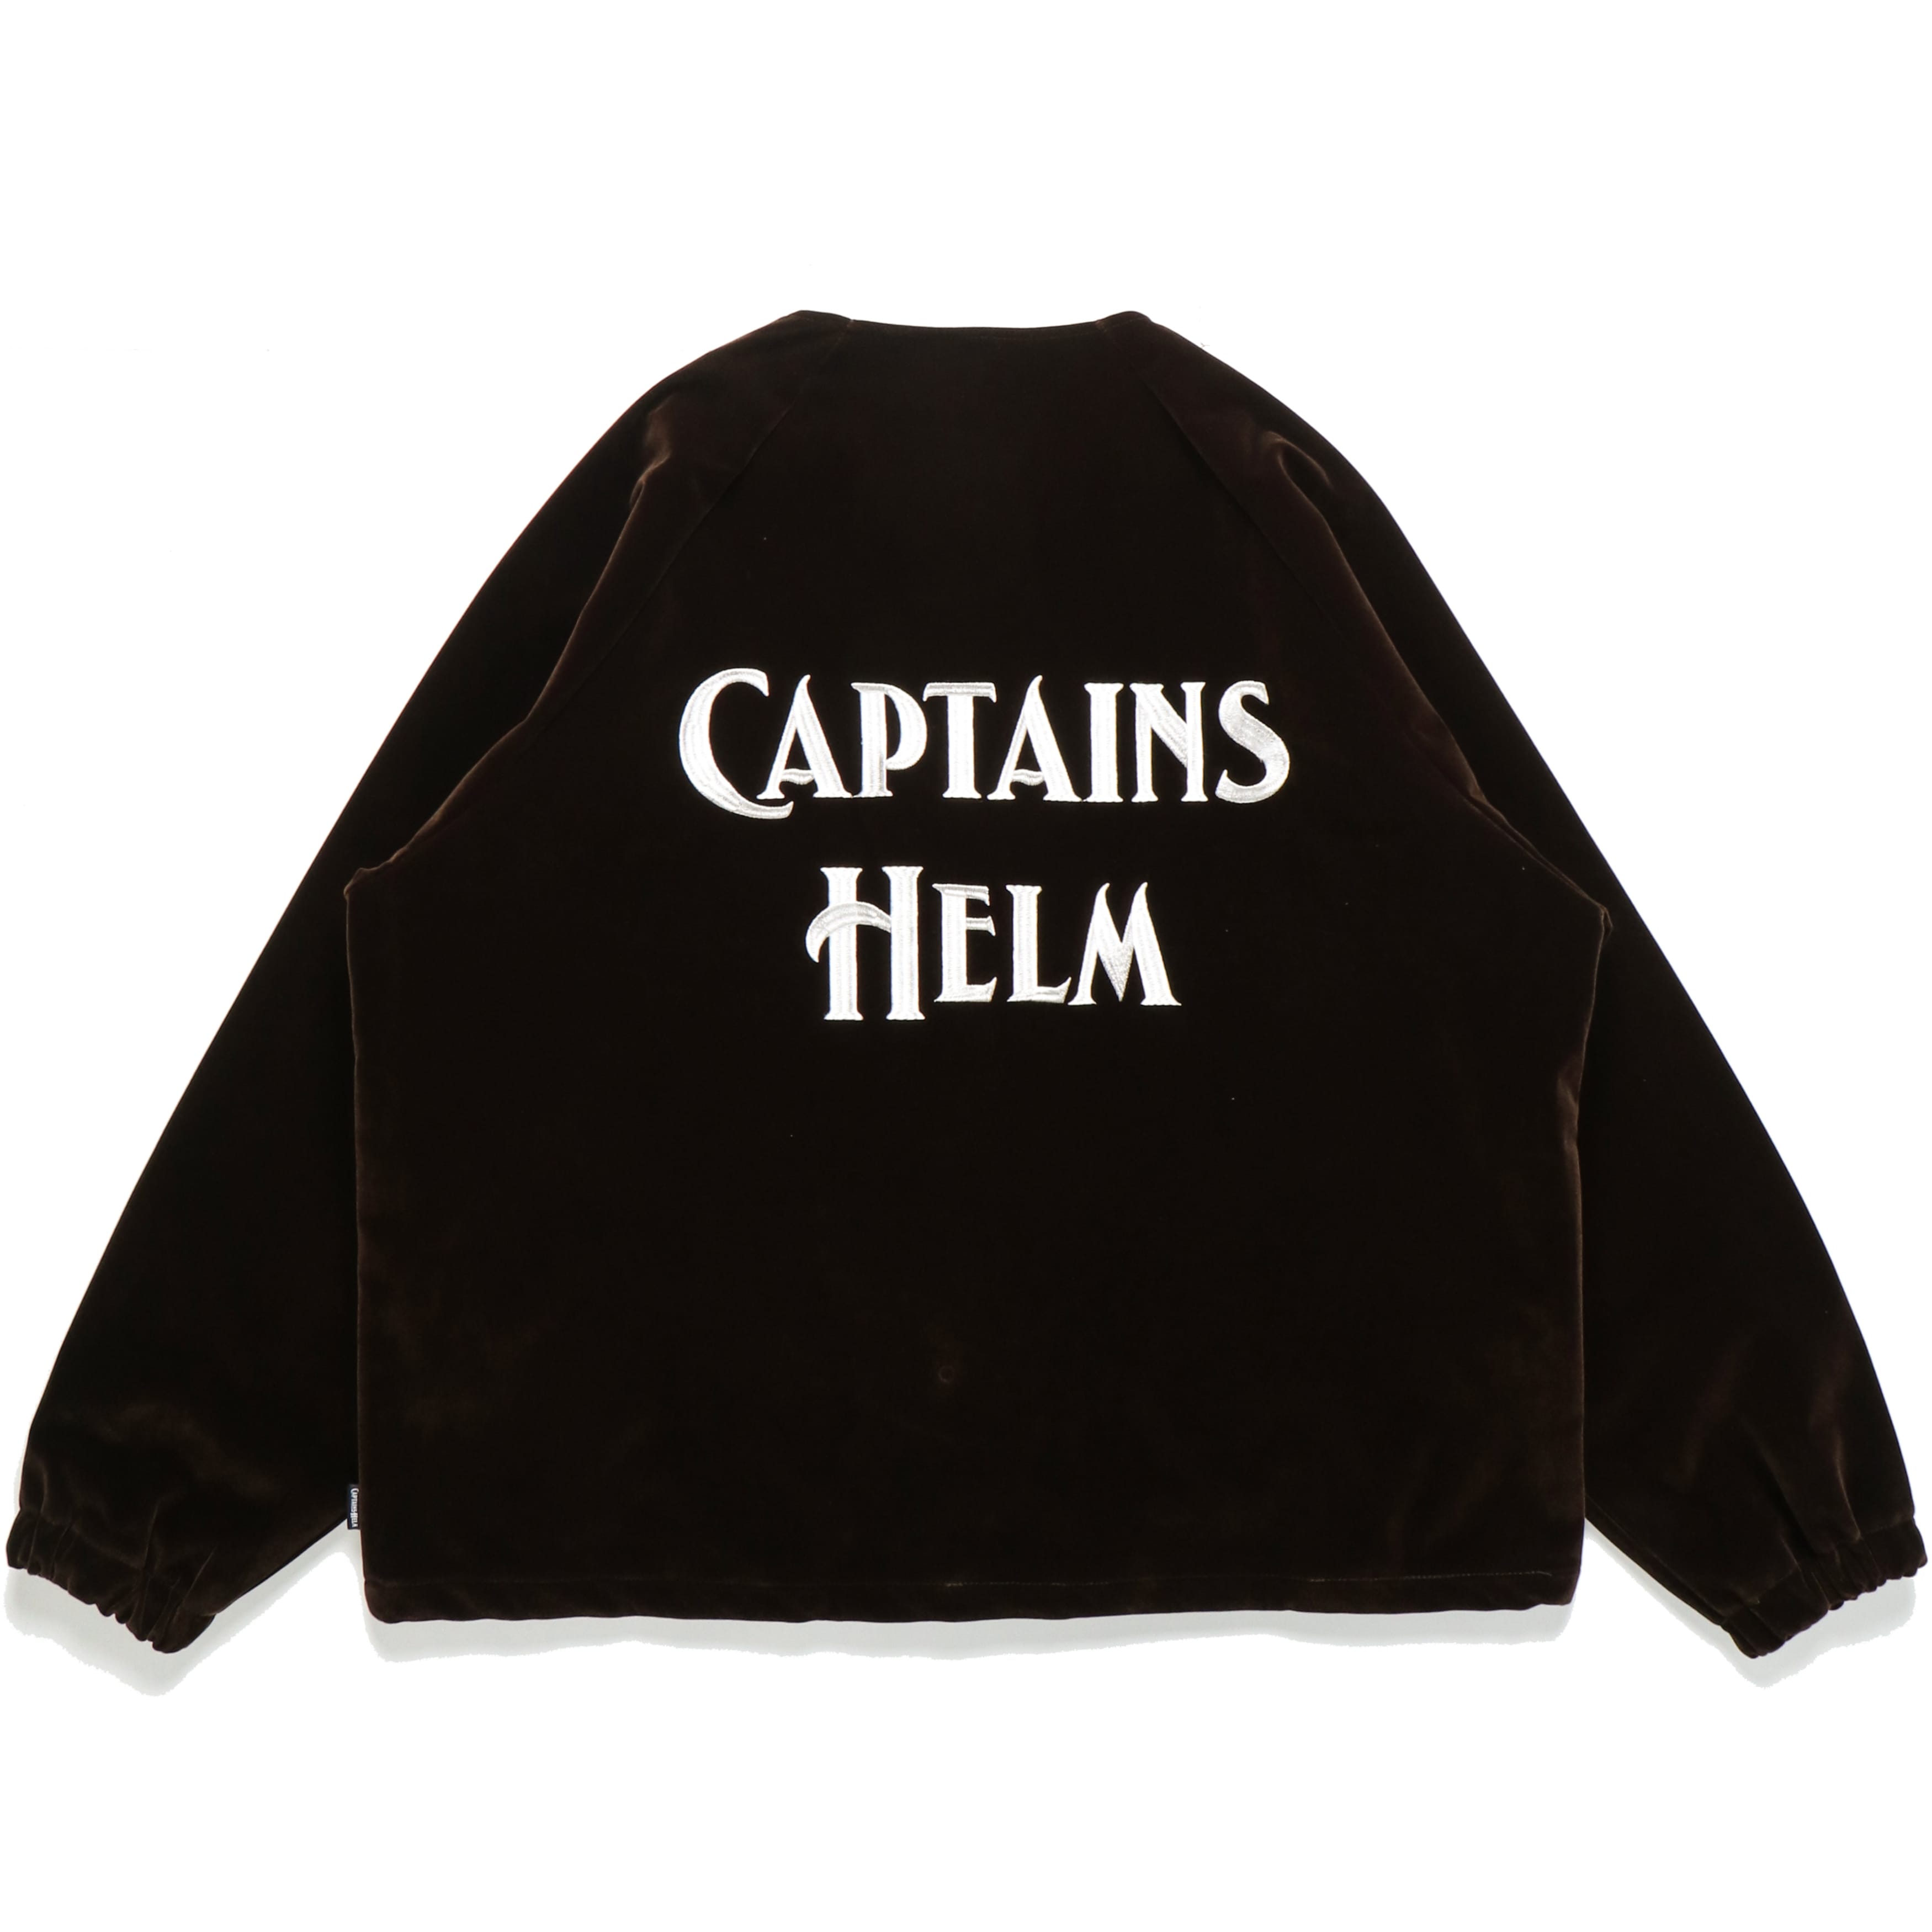 CAPTAINS HELM – TIME AFTER TIME